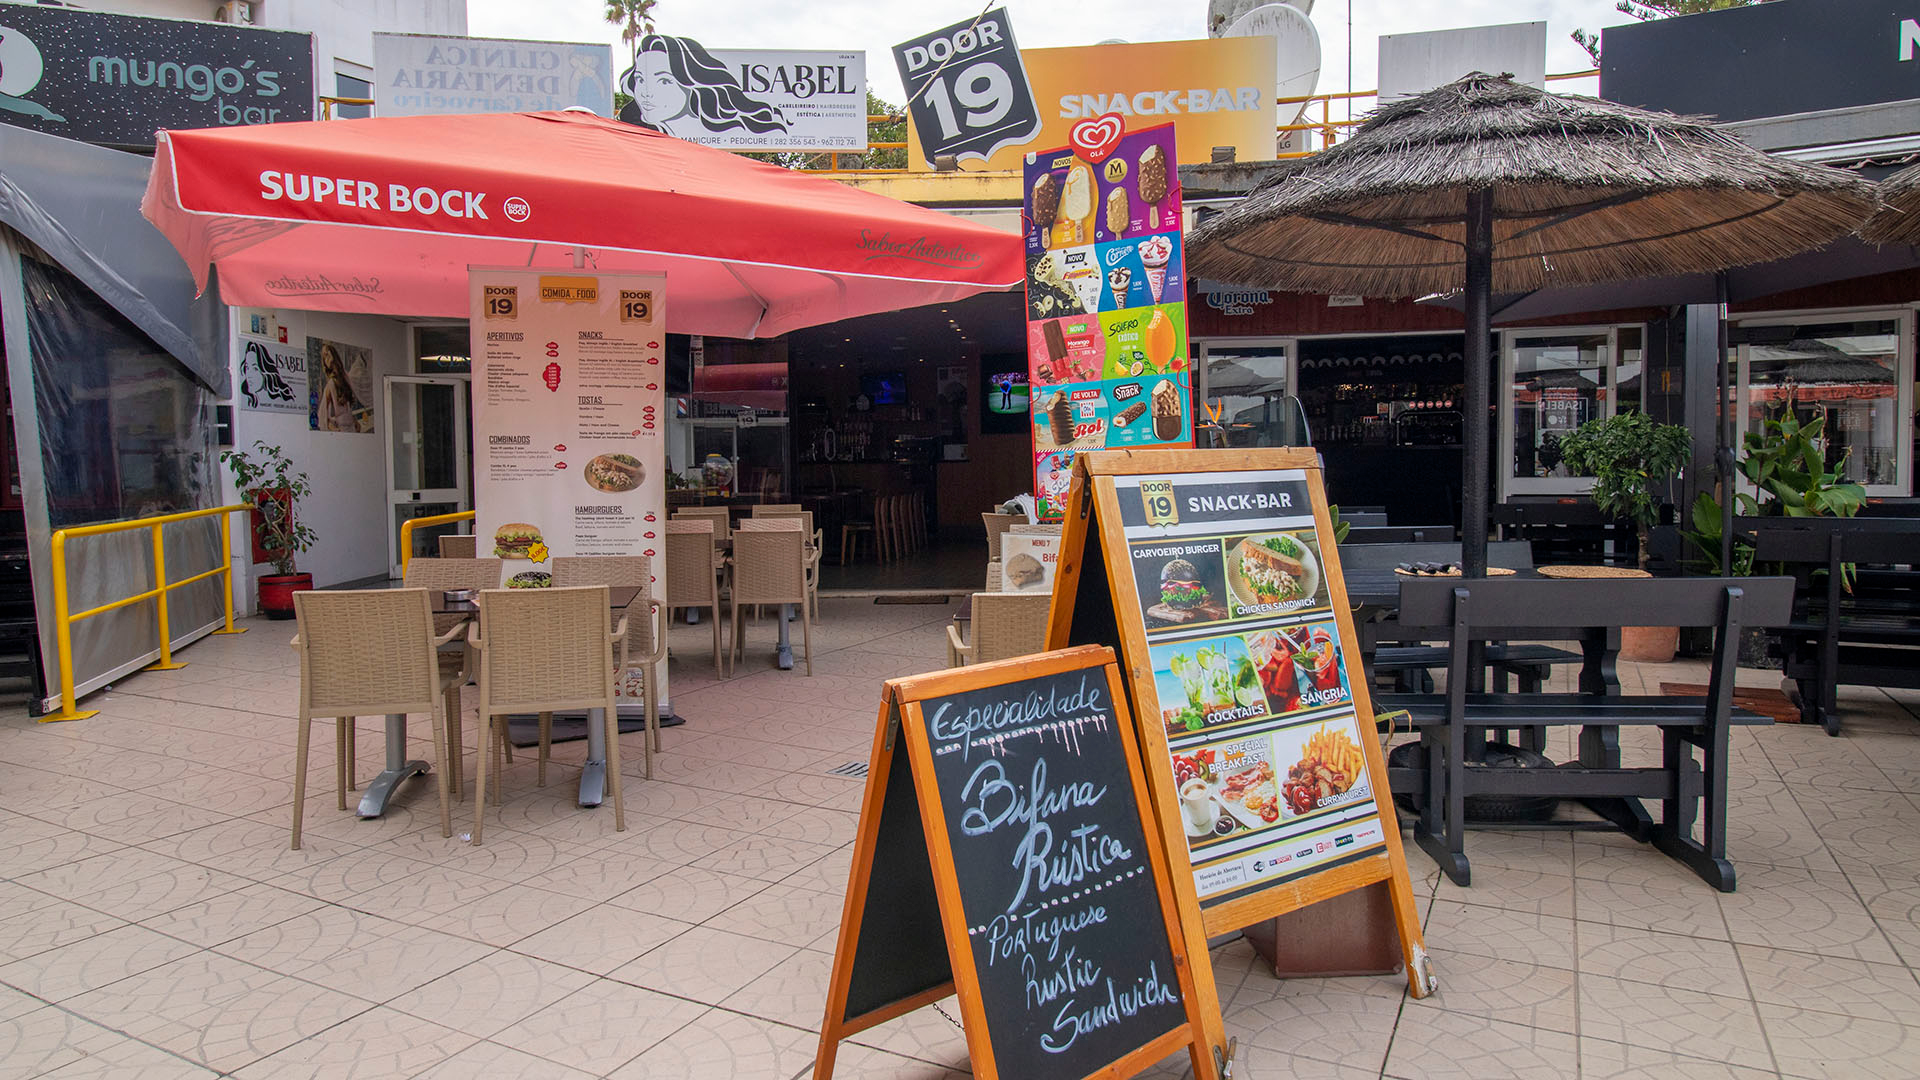 Renowned and successful business for sale in the centre of Carvoeiro | PPP687 Renowned and successful snack bar/restaurant for sale in an excellent location in the center of Carvoeiro with lots of passing customers and close to the beach.